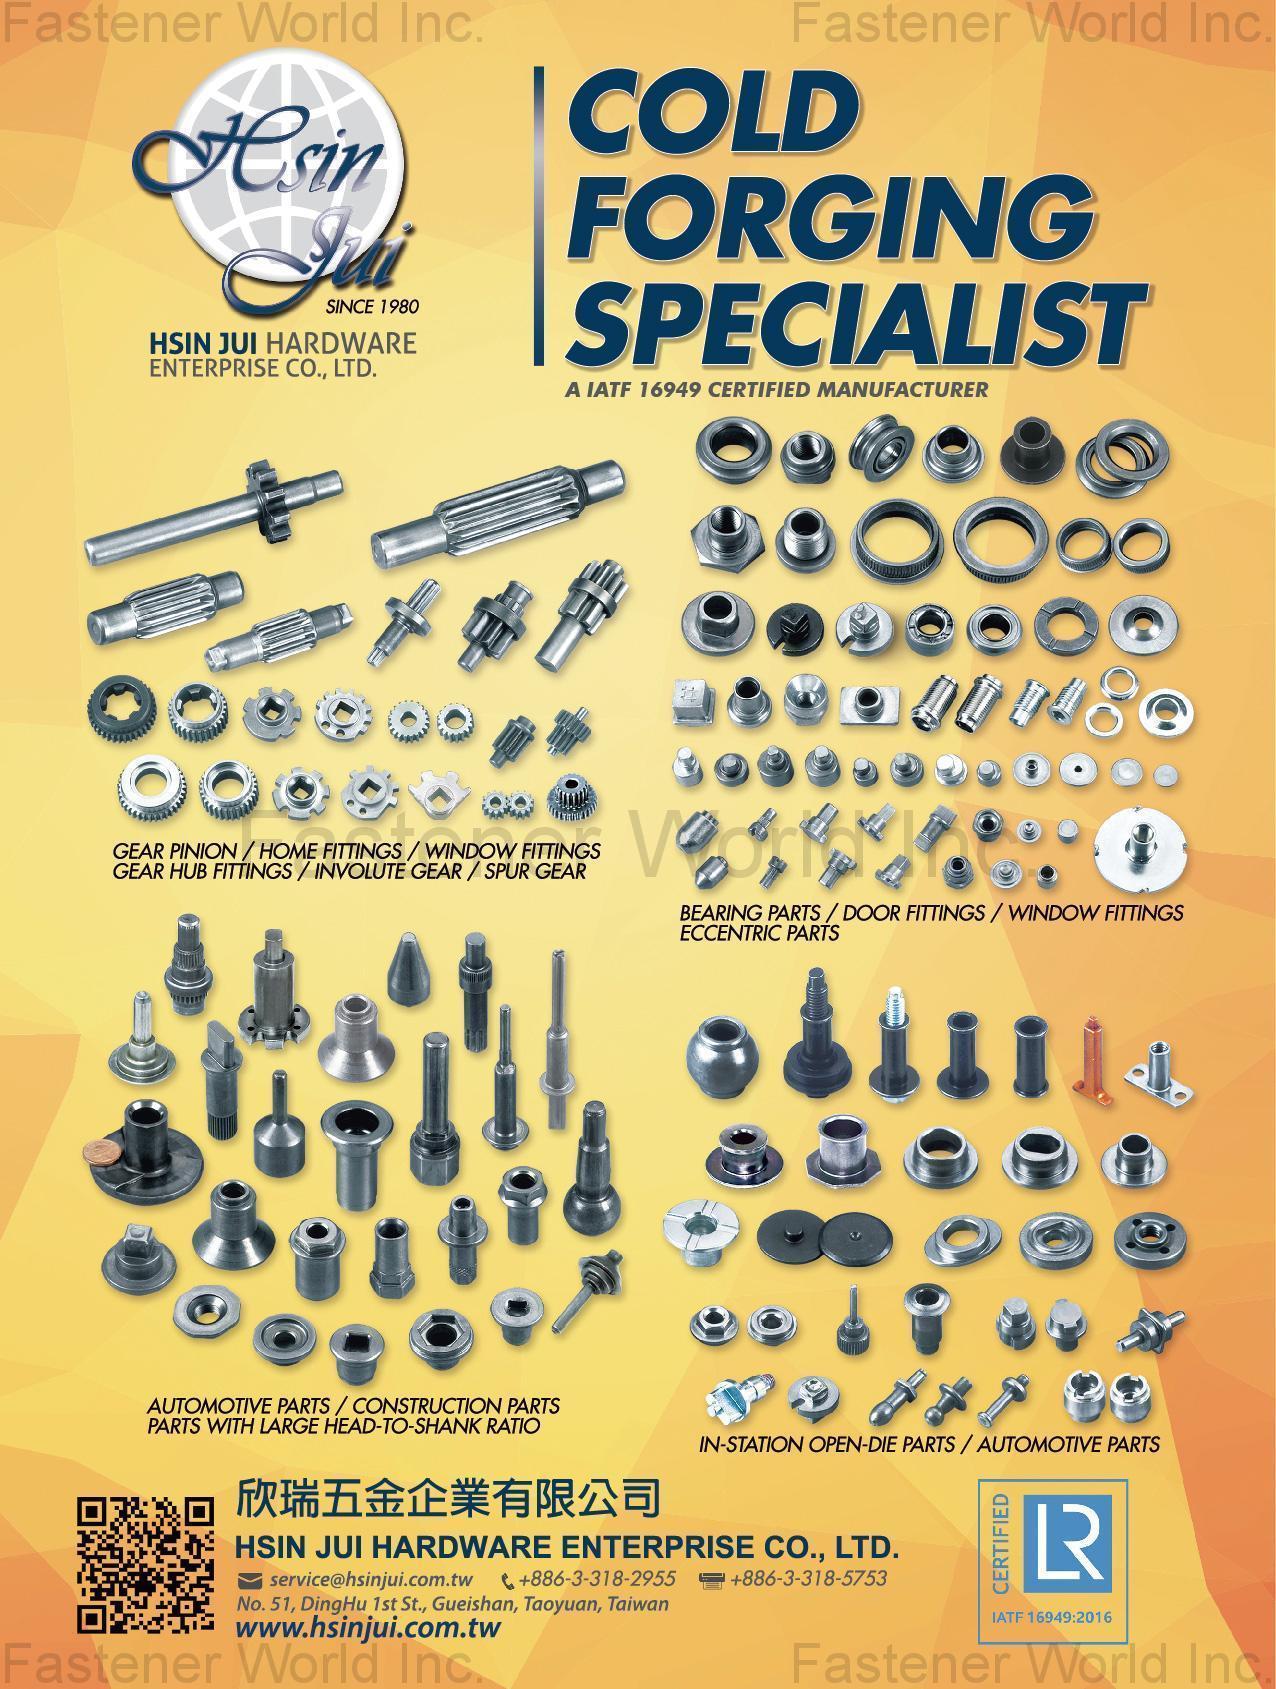  Gear Pinion, Home Fittings, Window Fittings, Gear Hub Fittings, Involute Gear, Spur Gear, Bearing Parts, Door Fittings, Eccentric Parts, Automotive Parts, Construction Parts, Parts with Large Head-to-Shank Ratio, In-Station Open-Die Parts